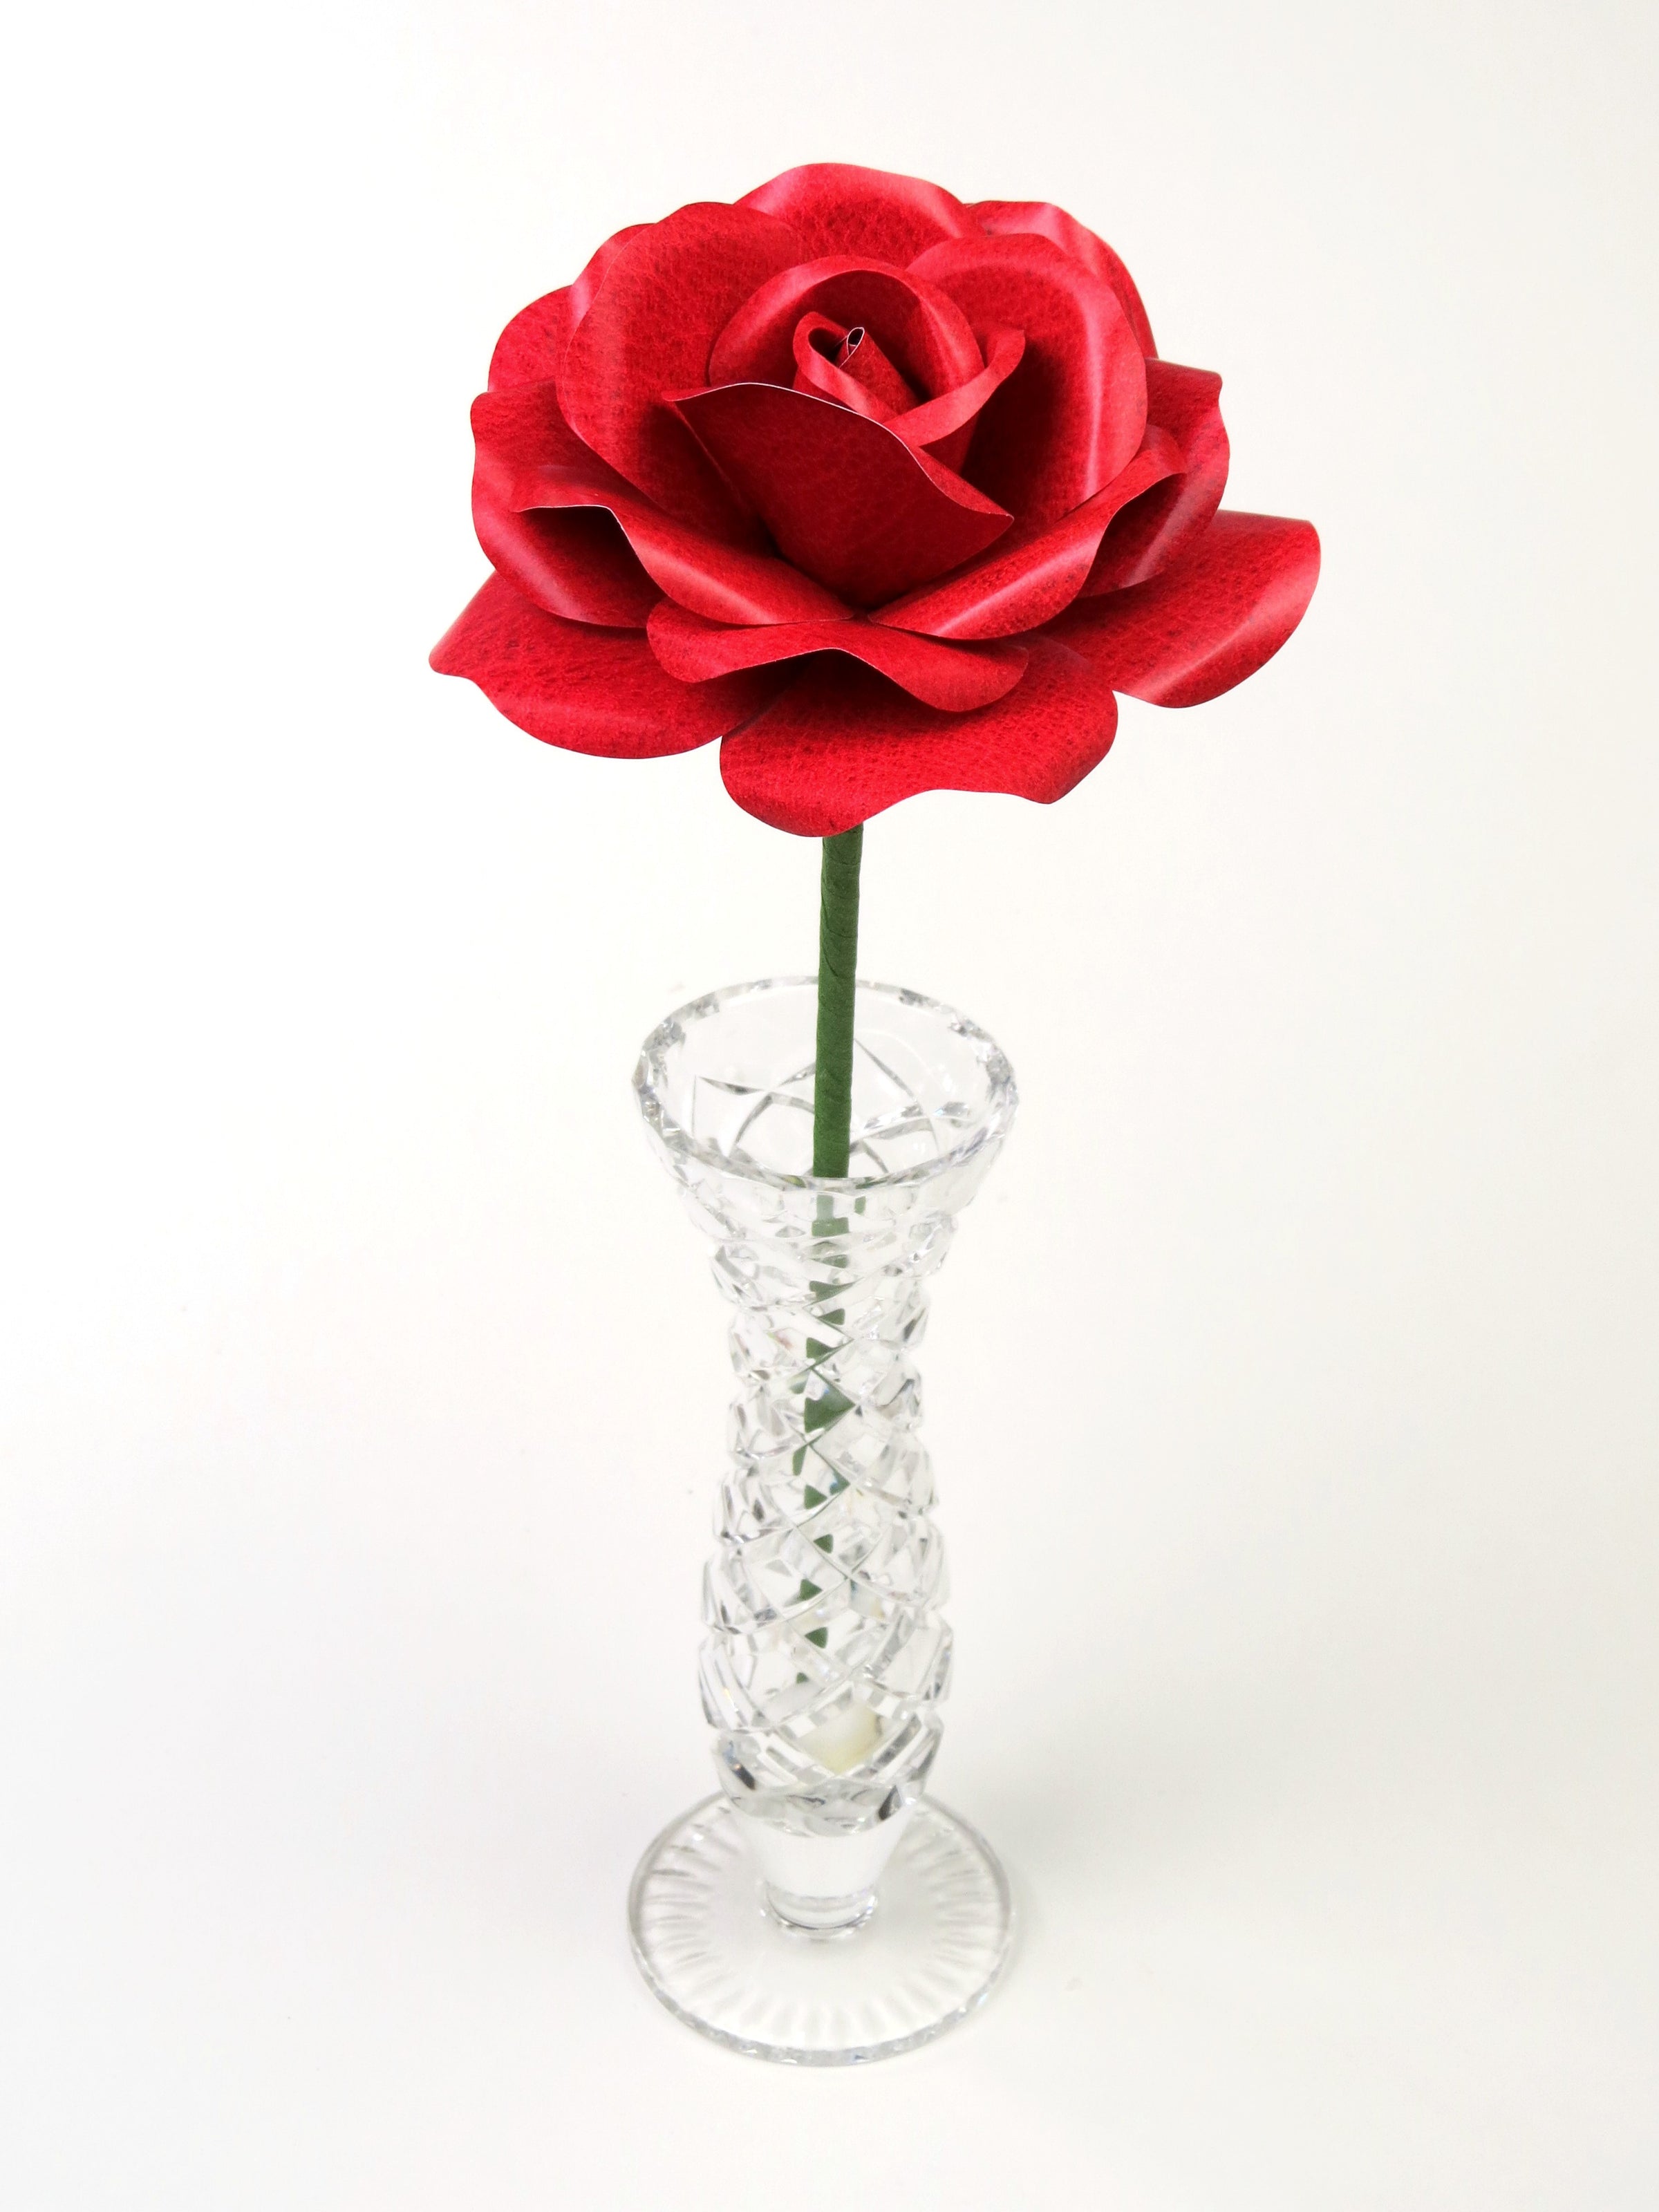 Leafless red leather grain paper rose standing in a slender glass vase